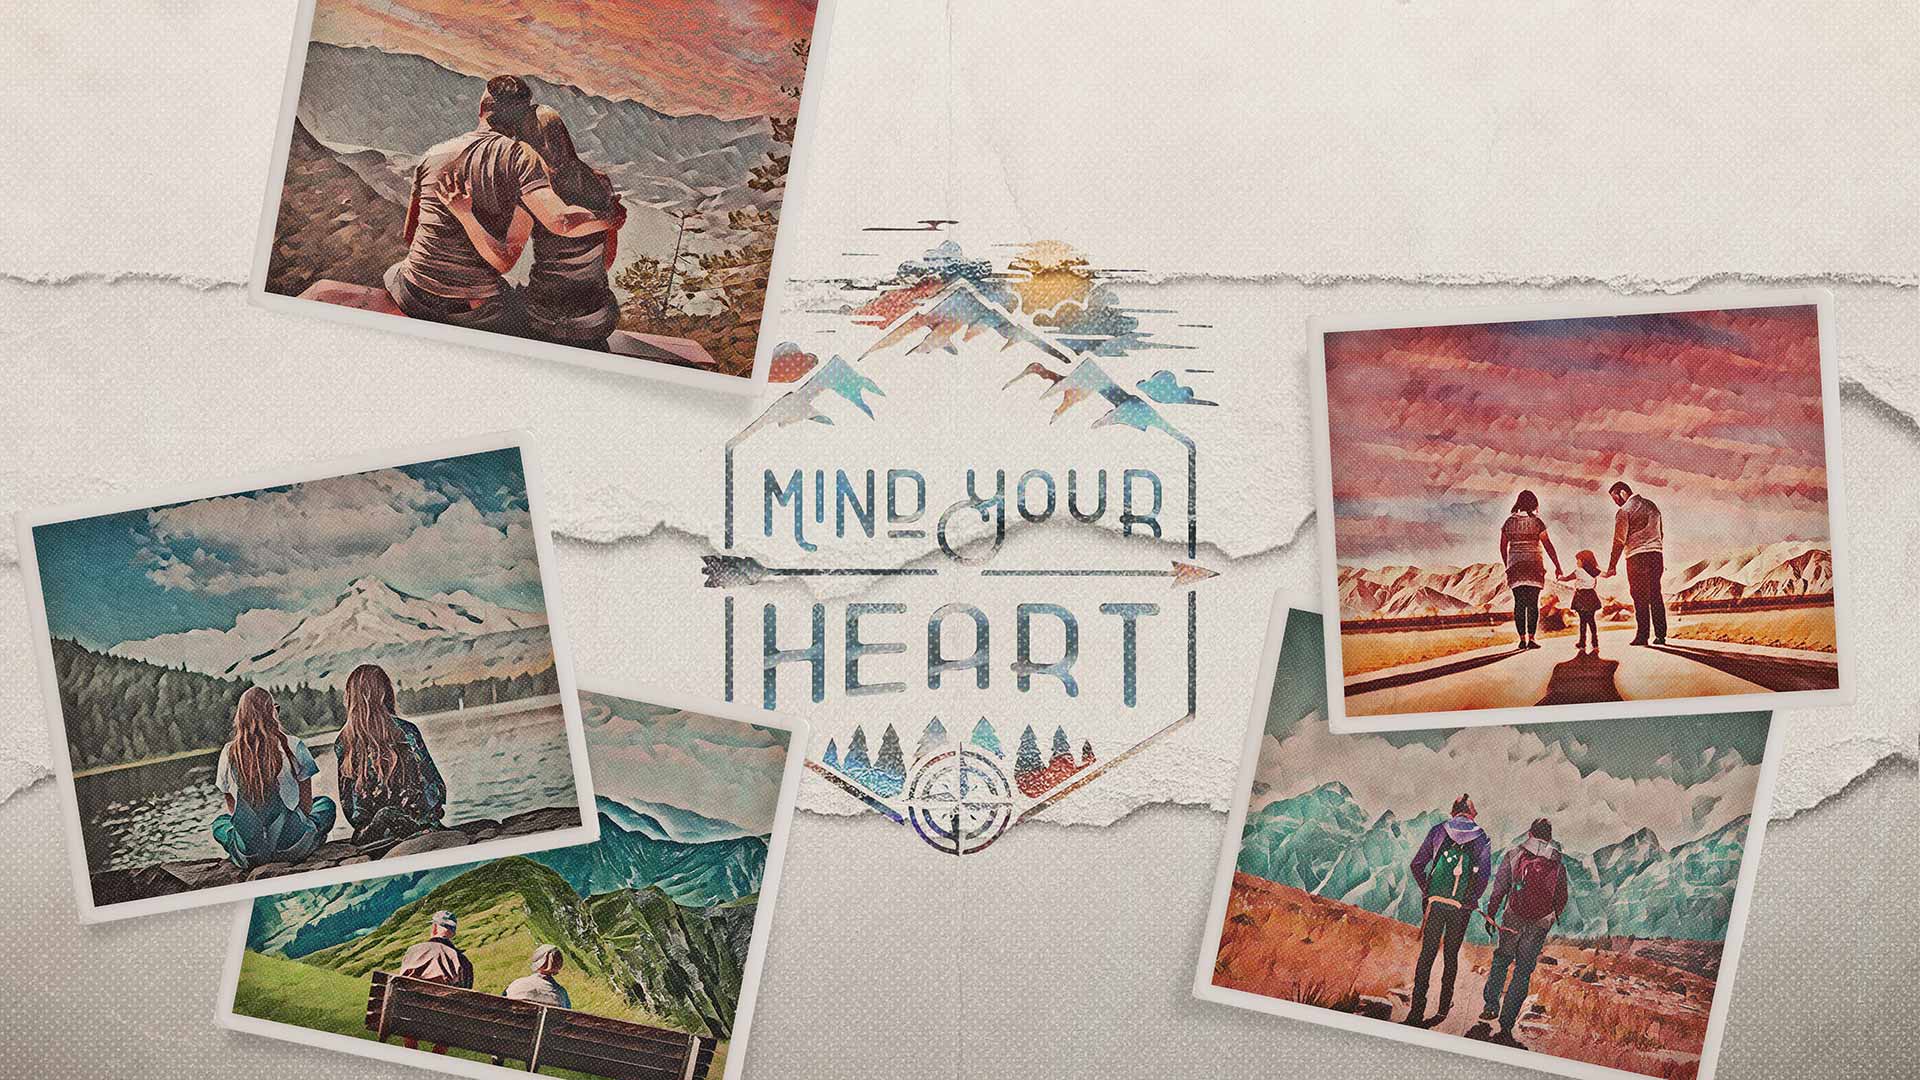 Mind Your Heart